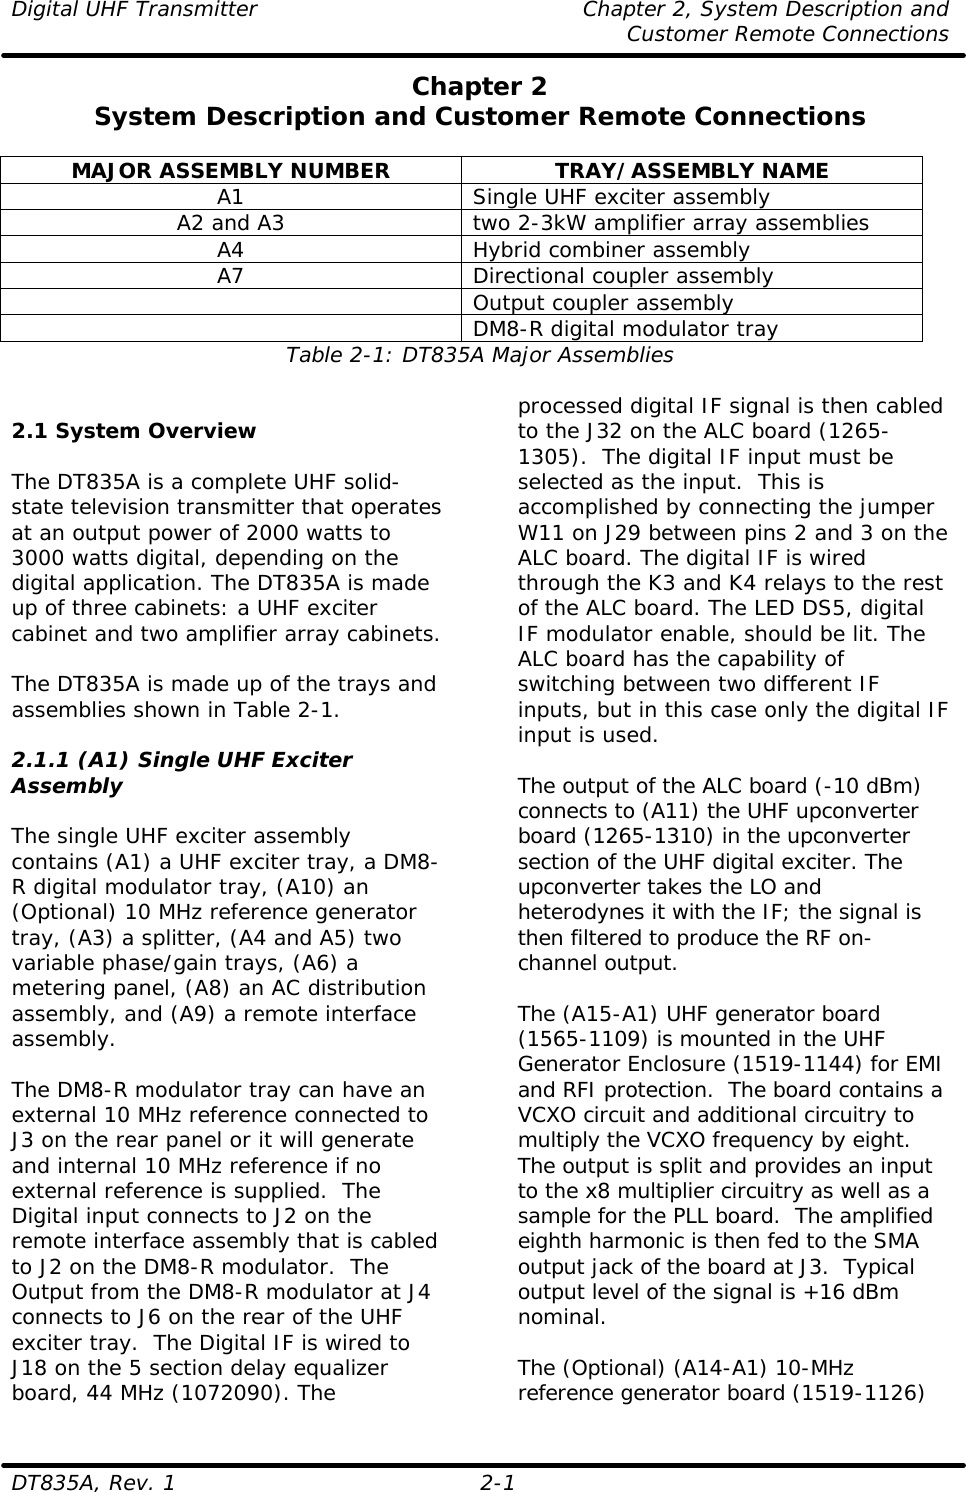 Digital UHF Transmitter    Chapter 2, System Description and     Customer Remote Connections DT835A, Rev. 1    2-1 Chapter 2 System Description and Customer Remote Connections  MAJOR ASSEMBLY NUMBER TRAY/ASSEMBLY NAME A1 Single UHF exciter assembly A2 and A3 two 2-3kW amplifier array assemblies A4 Hybrid combiner assembly A7 Directional coupler assembly  Output coupler assembly  DM8-R digital modulator tray Table 2-1: DT835A Major Assemblies   2.1 System Overview  The DT835A is a complete UHF solid-state television transmitter that operates at an output power of 2000 watts to 3000 watts digital, depending on the digital application. The DT835A is made up of three cabinets: a UHF exciter  cabinet and two amplifier array cabinets.   The DT835A is made up of the trays and assemblies shown in Table 2-1.  2.1.1 (A1) Single UHF Exciter Assembly   The single UHF exciter assembly contains (A1) a UHF exciter tray, a DM8-R digital modulator tray, (A10) an (Optional) 10 MHz reference generator tray, (A3) a splitter, (A4 and A5) two variable phase/gain trays, (A6) a metering panel, (A8) an AC distribution assembly, and (A9) a remote interface assembly.   The DM8-R modulator tray can have an external 10 MHz reference connected to J3 on the rear panel or it will generate and internal 10 MHz reference if no external reference is supplied.  The Digital input connects to J2 on the remote interface assembly that is cabled to J2 on the DM8-R modulator.  The Output from the DM8-R modulator at J4 connects to J6 on the rear of the UHF exciter tray.  The Digital IF is wired to J18 on the 5 section delay equalizer board, 44 MHz (1072090). The processed digital IF signal is then cabled to the J32 on the ALC board (1265-1305).  The digital IF input must be selected as the input.  This is accomplished by connecting the jumper W11 on J29 between pins 2 and 3 on the ALC board. The digital IF is wired through the K3 and K4 relays to the rest of the ALC board. The LED DS5, digital IF modulator enable, should be lit. The ALC board has the capability of switching between two different IF inputs, but in this case only the digital IF input is used.  The output of the ALC board (-10 dBm) connects to (A11) the UHF upconverter board (1265-1310) in the upconverter section of the UHF digital exciter. The upconverter takes the LO and heterodynes it with the IF; the signal is then filtered to produce the RF on-channel output.  The (A15-A1) UHF generator board (1565-1109) is mounted in the UHF Generator Enclosure (1519-1144) for EMI and RFI protection.  The board contains a VCXO circuit and additional circuitry to multiply the VCXO frequency by eight.  The output is split and provides an input to the x8 multiplier circuitry as well as a sample for the PLL board.  The amplified eighth harmonic is then fed to the SMA output jack of the board at J3.  Typical output level of the signal is +16 dBm nominal.  The (Optional) (A14-A1) 10-MHz reference generator board (1519-1126) 